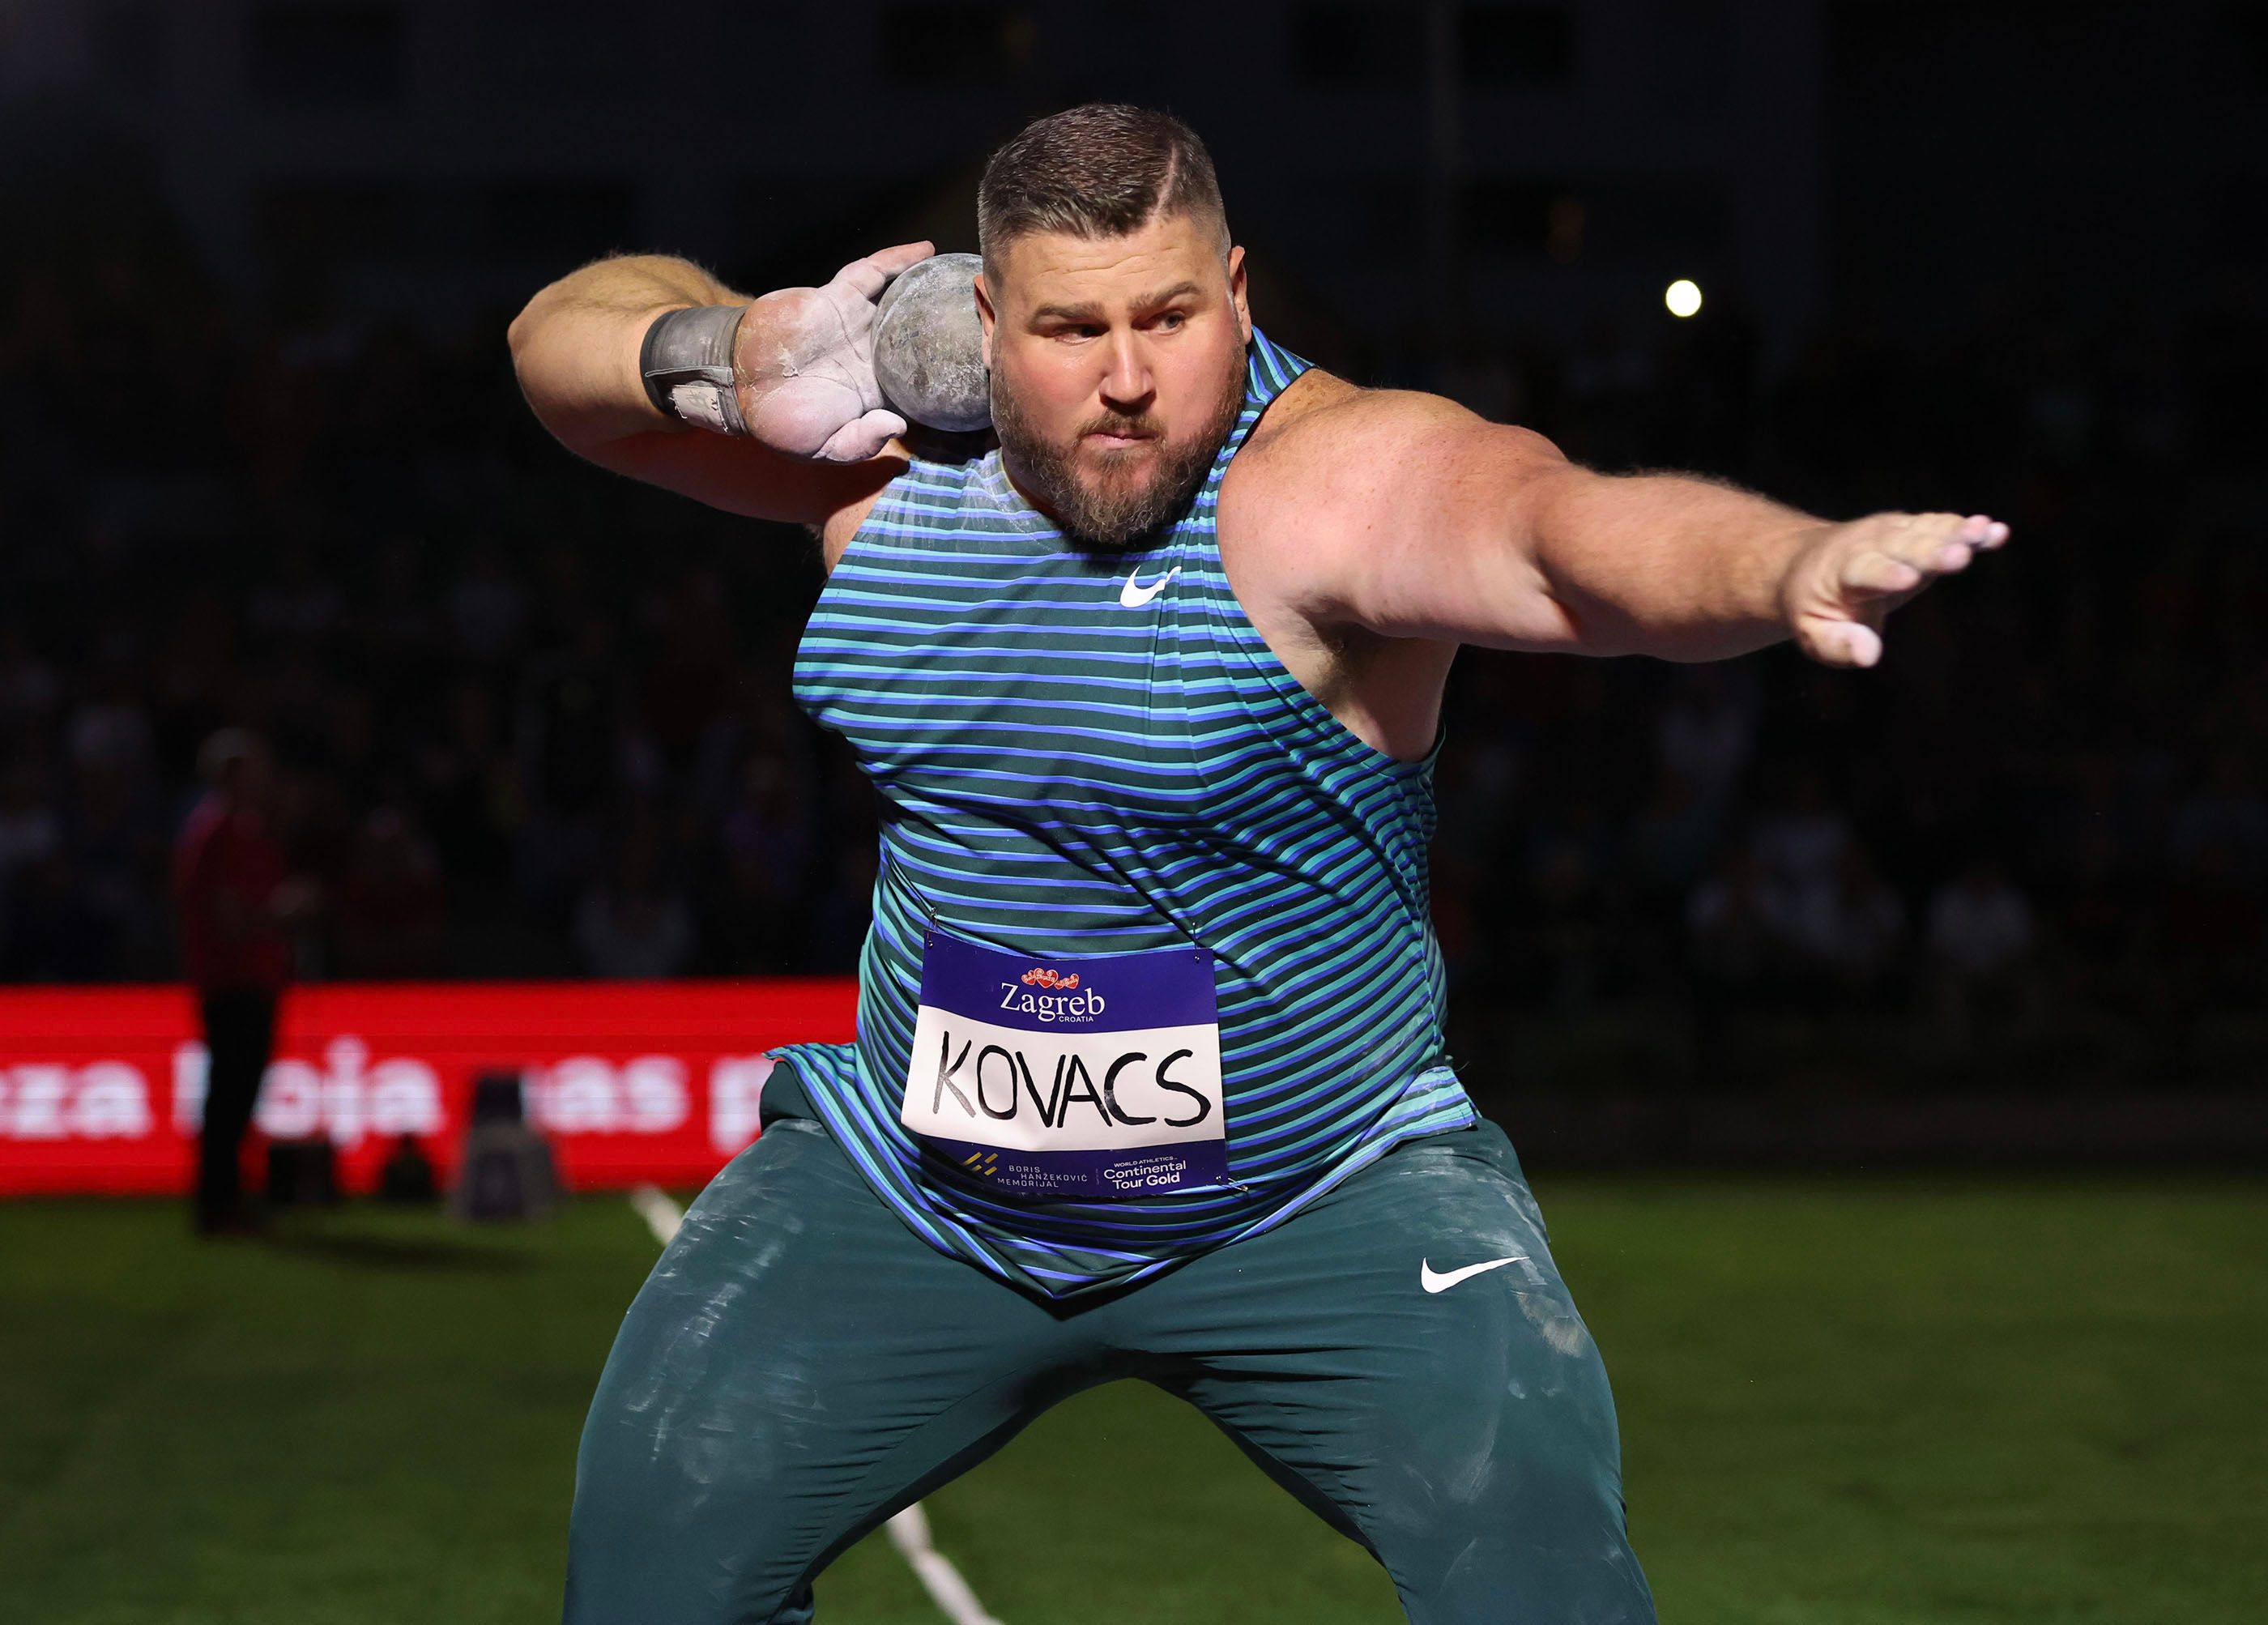 Joe Kovacs competes at the World Athletics Continental Tour Gold meeting in Zagreb